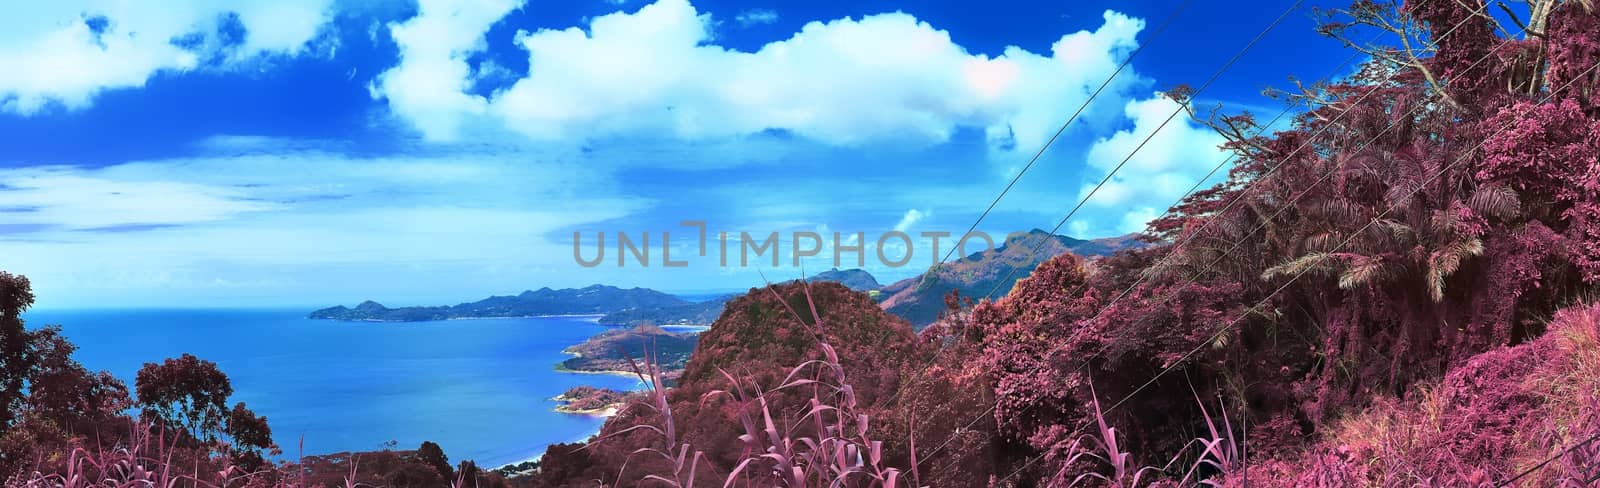 Beautiful purple and pink infrared panorama of a landscape on th by MP_foto71